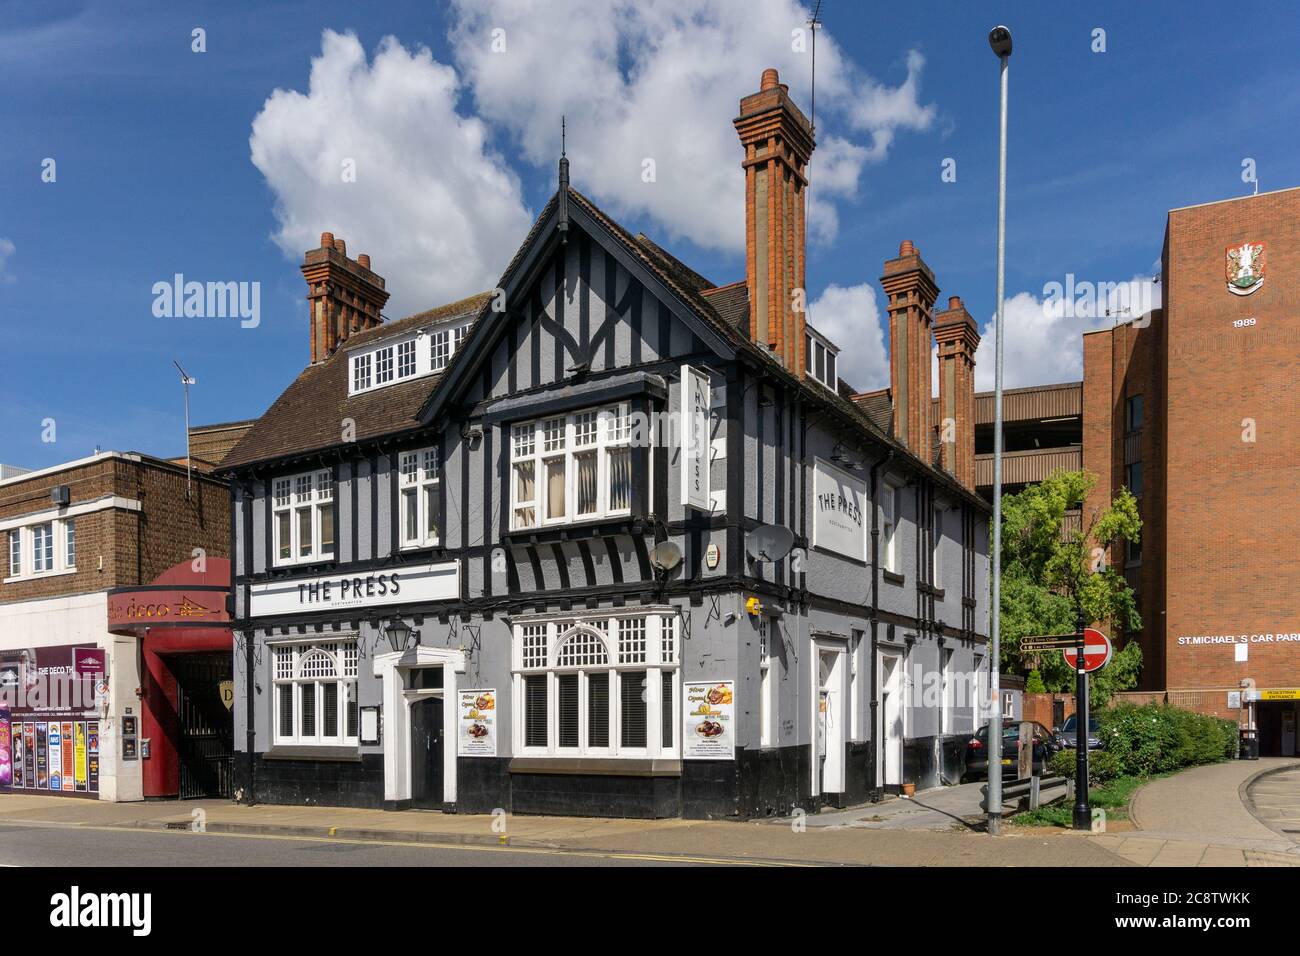 The Press pub, said to be one of the oldest trading pubs in the town, Northampton, UK Stock Photo